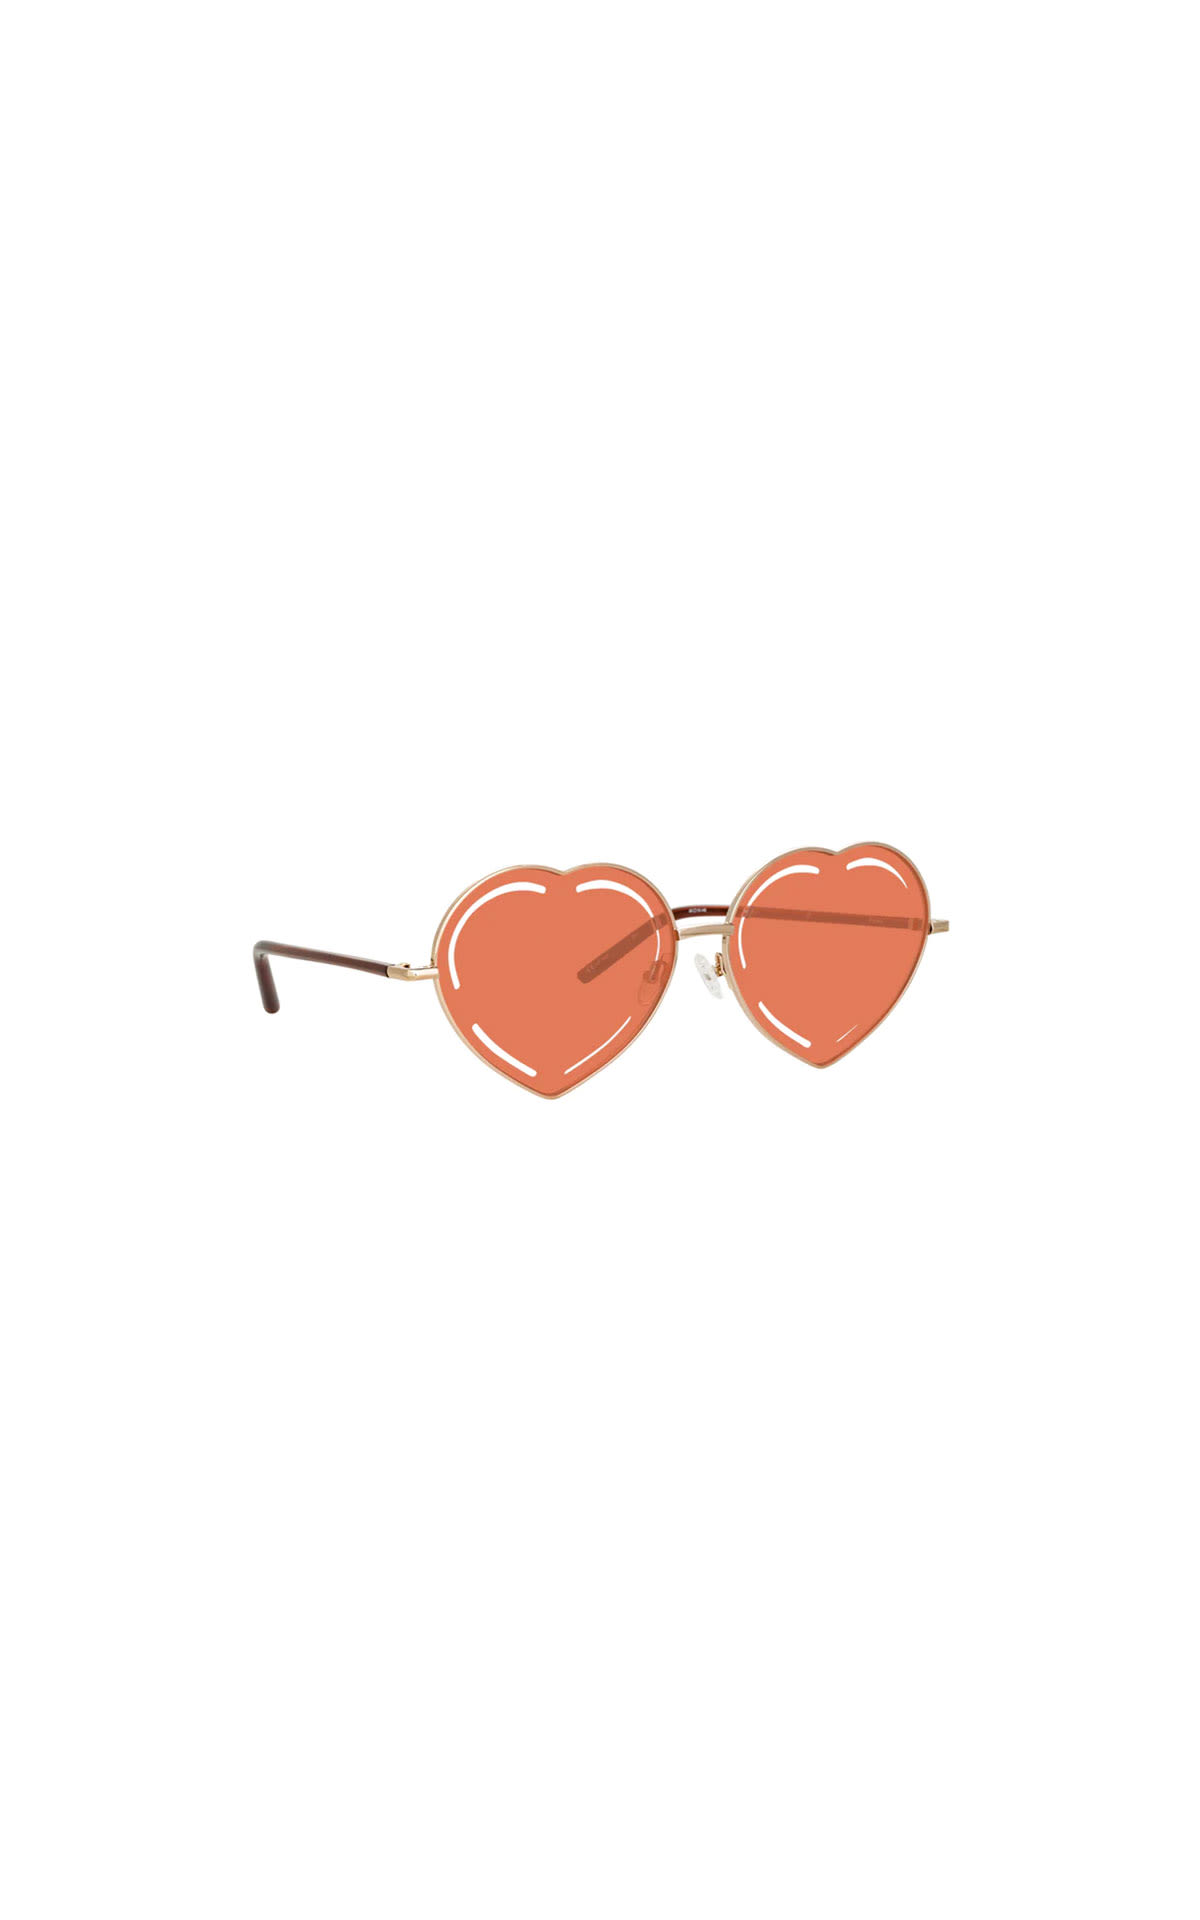 Linda Farrow Heart-shaped sunglasses from Bicester Village